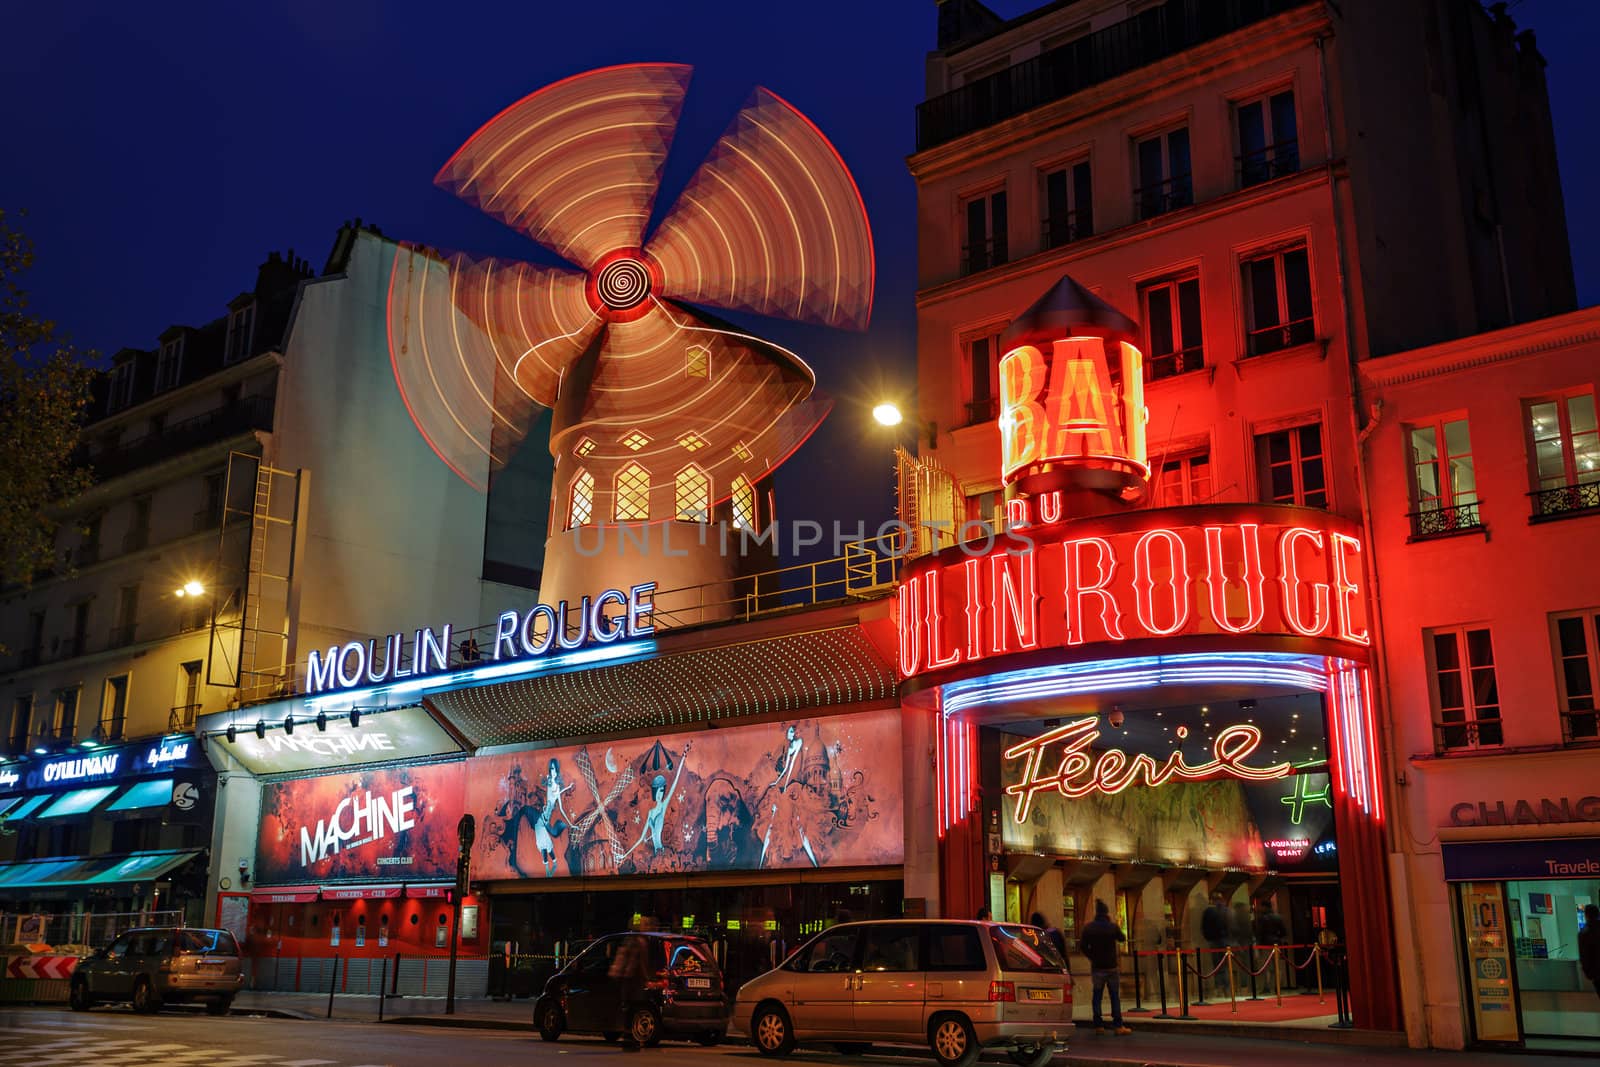 PARIS - NOV 12: The Moulin Rouge by night, on November 12, 2012 in Paris, France. Moulin Rouge is a famous cabaret built in 1889, locating in the Paris red-light district of Pigalle